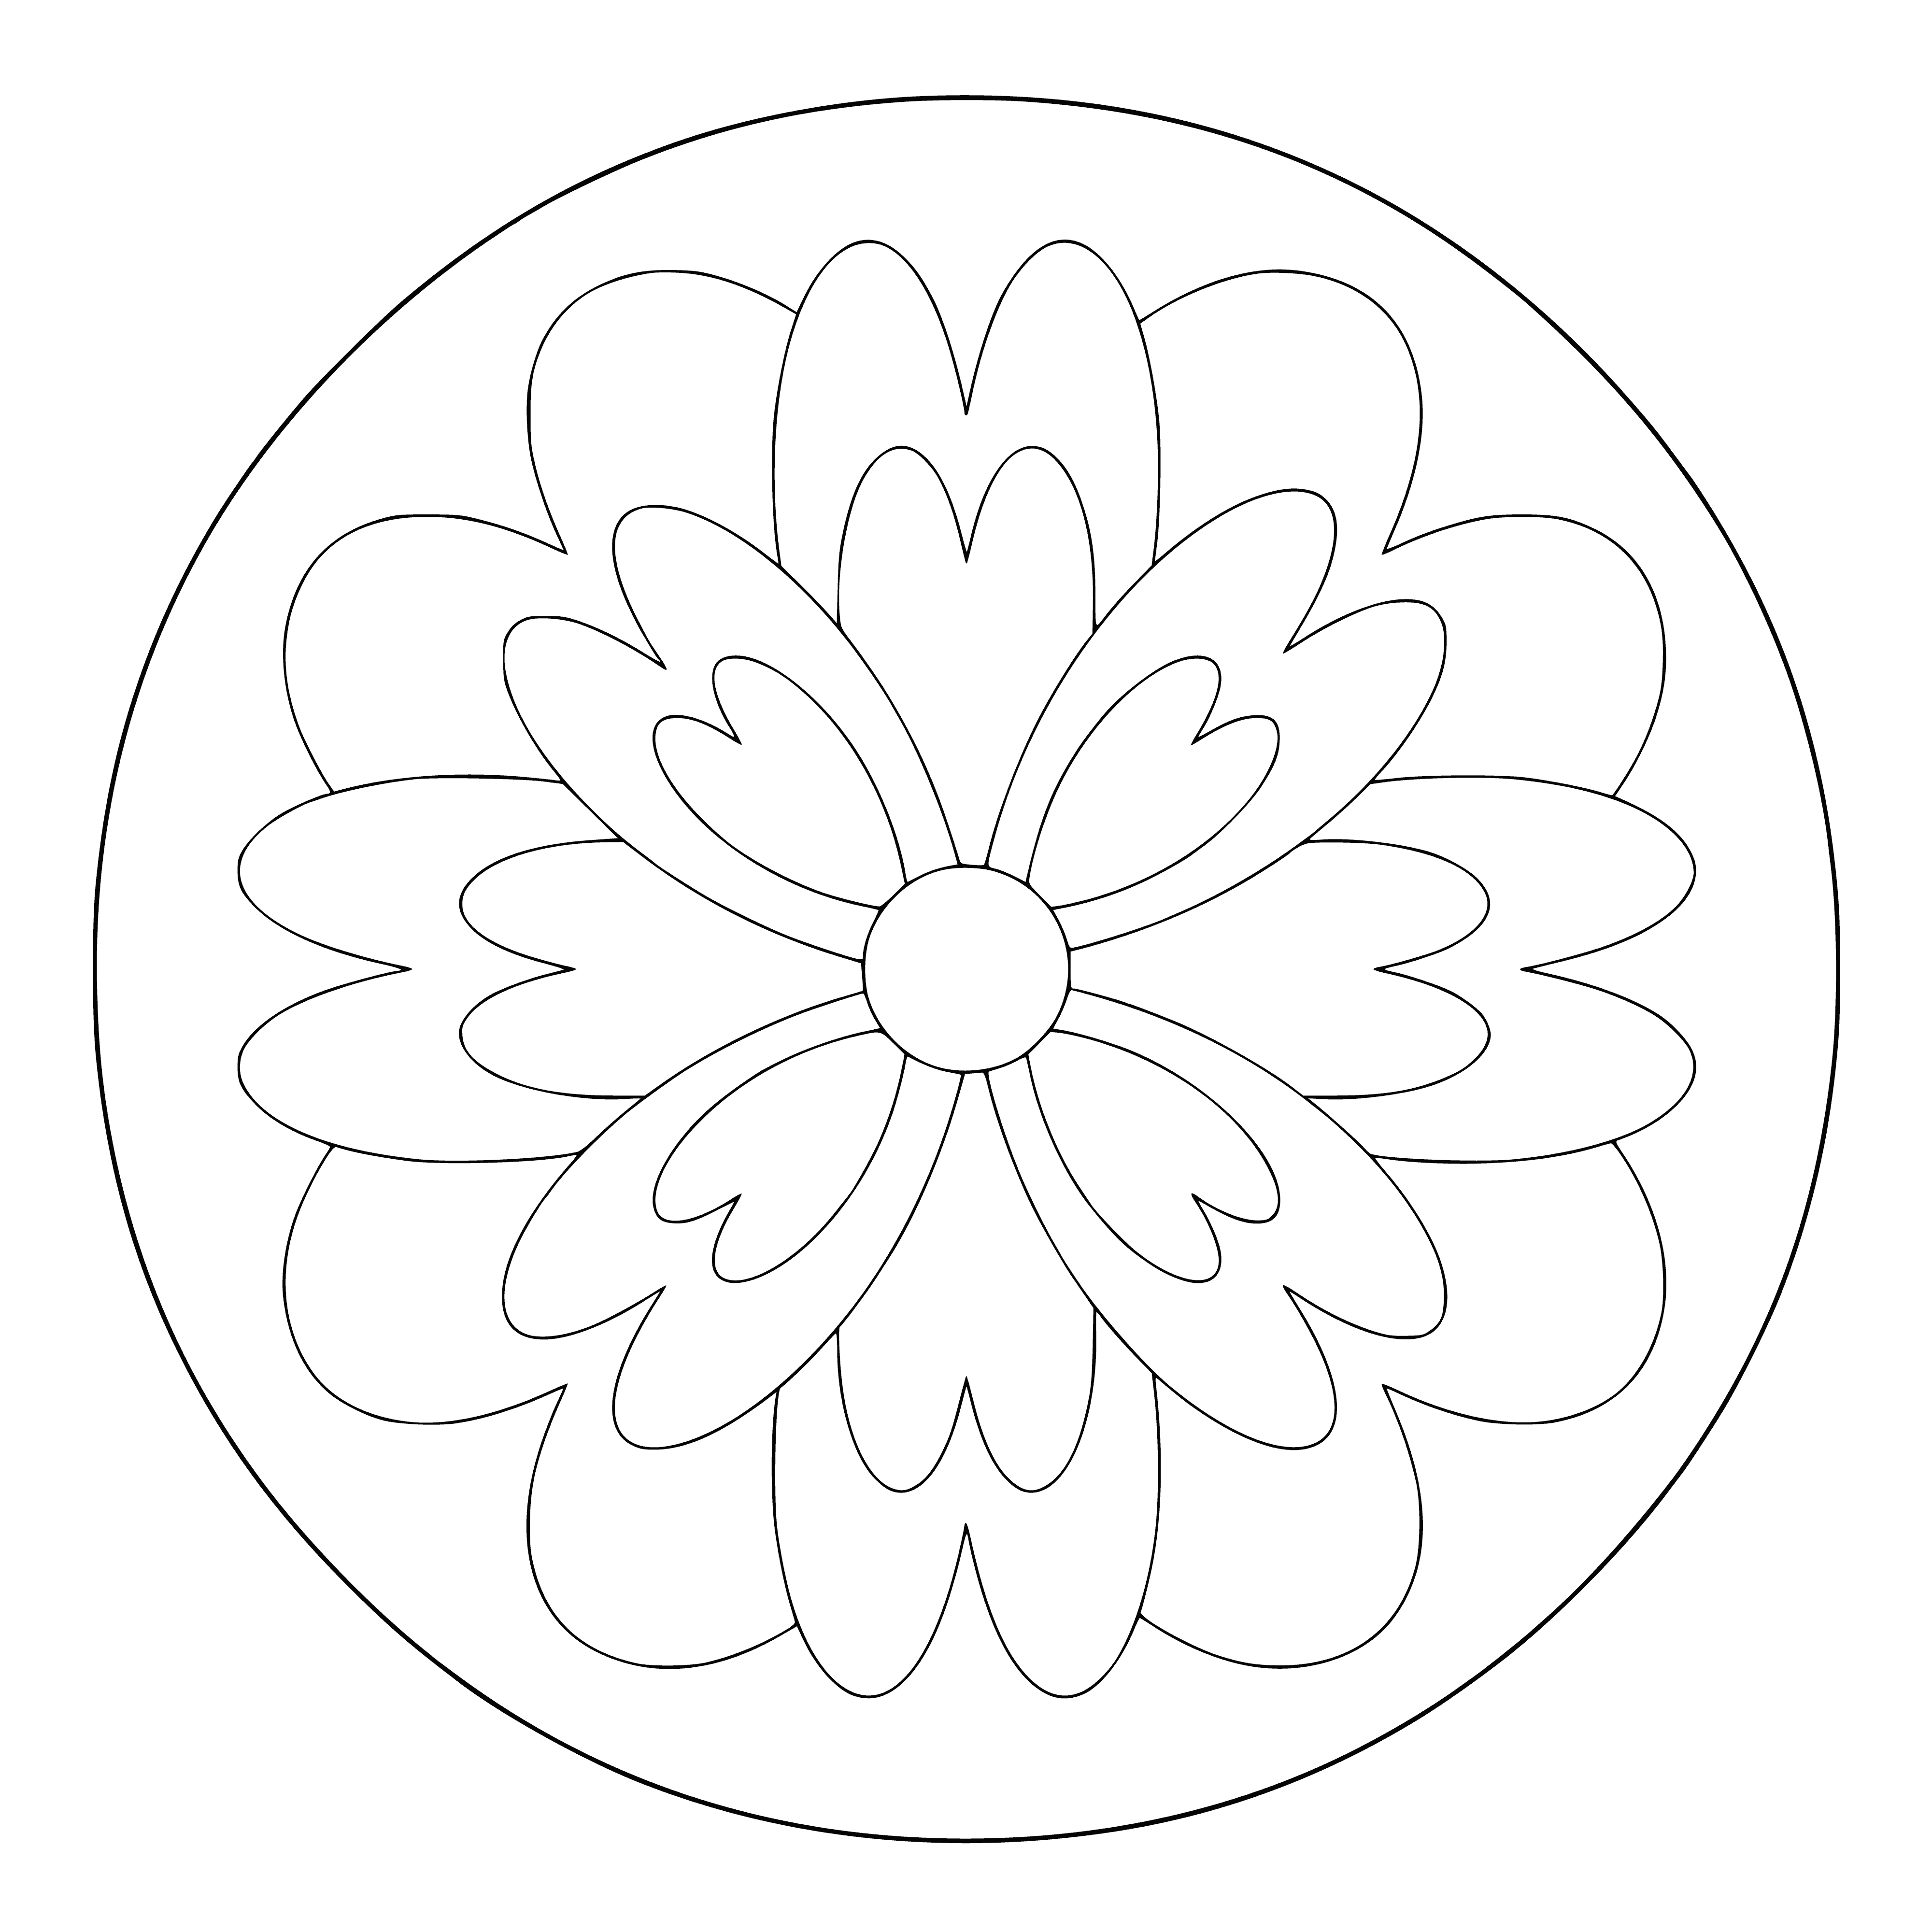 coloring page: Circle in center surrounded by four triangles, square with four diamonds inside, eight circles connected by lines outside. #MandalColoring